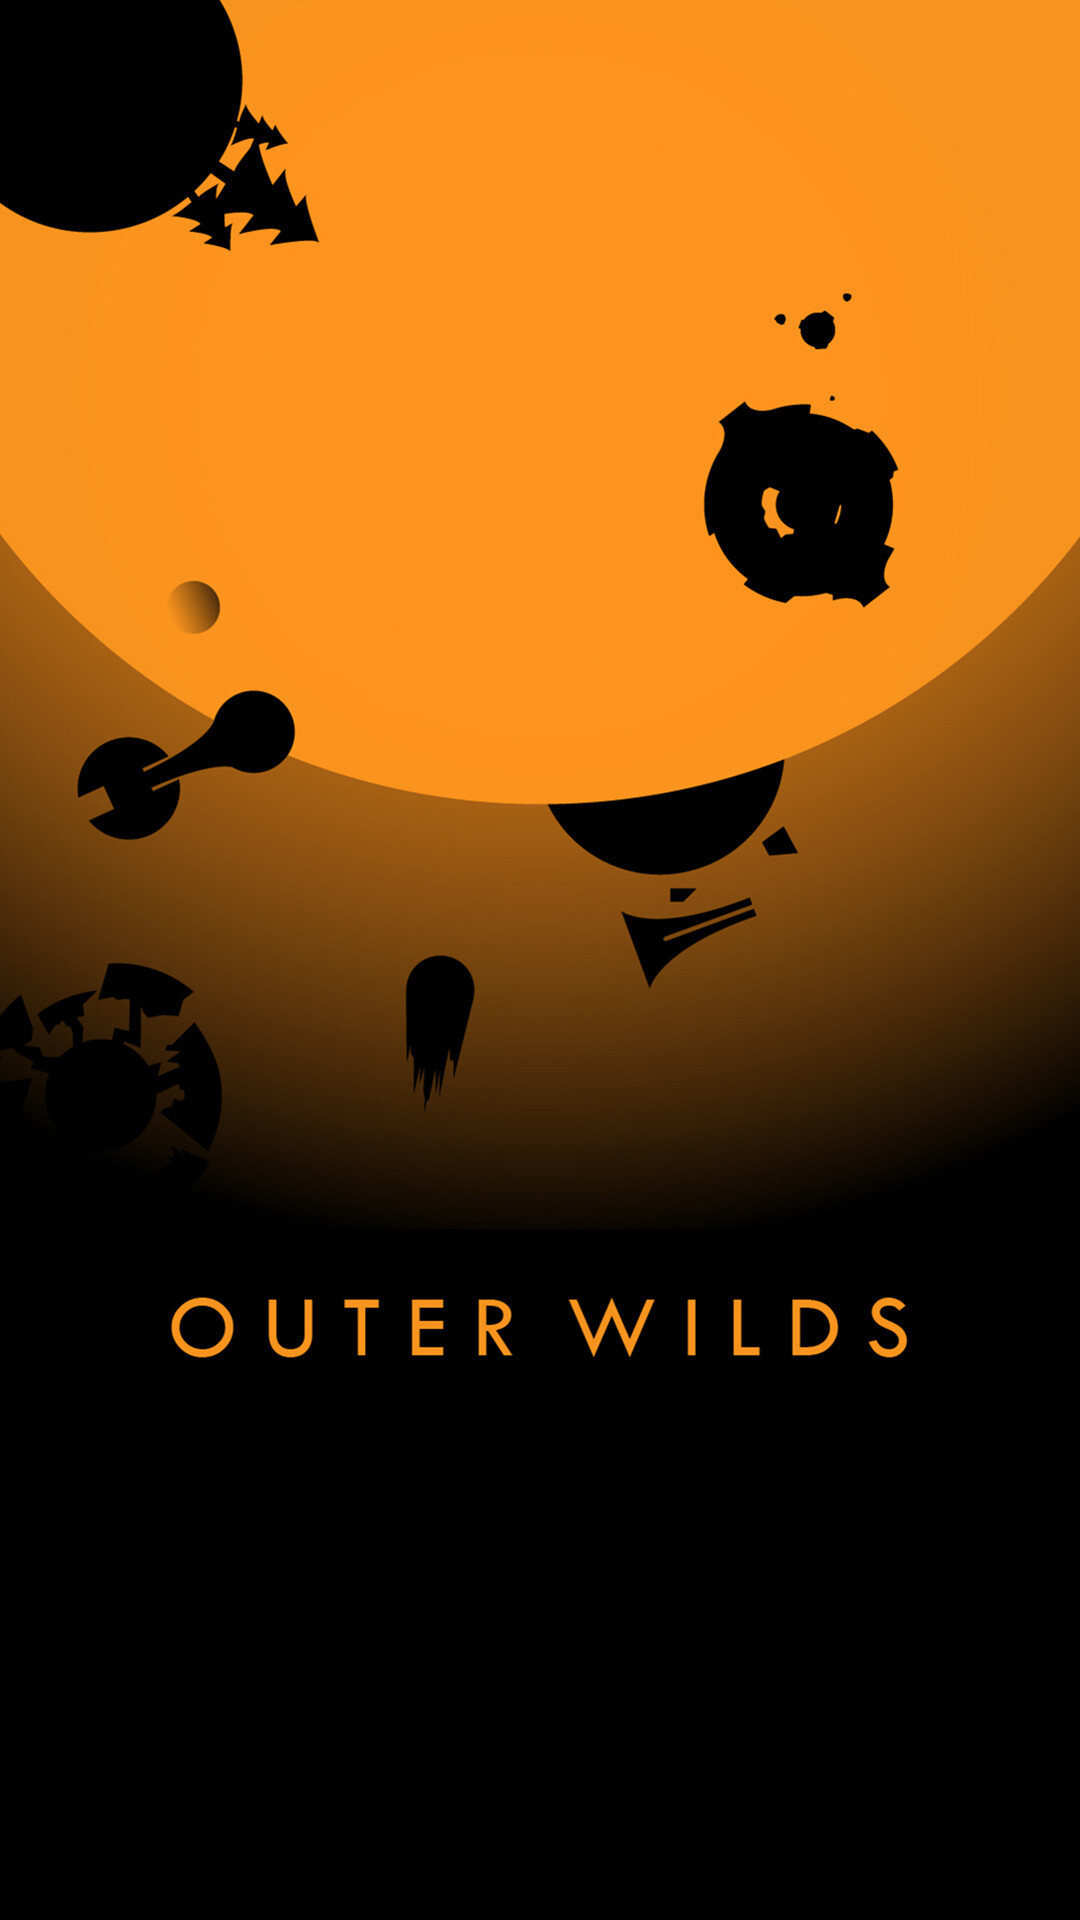 Outer Wilds: The game that began as Alex Beachum's USC Interactive Media and Games Division master's thesis and grew into a full-production commercial release. 1080x1920 Full HD Wallpaper.